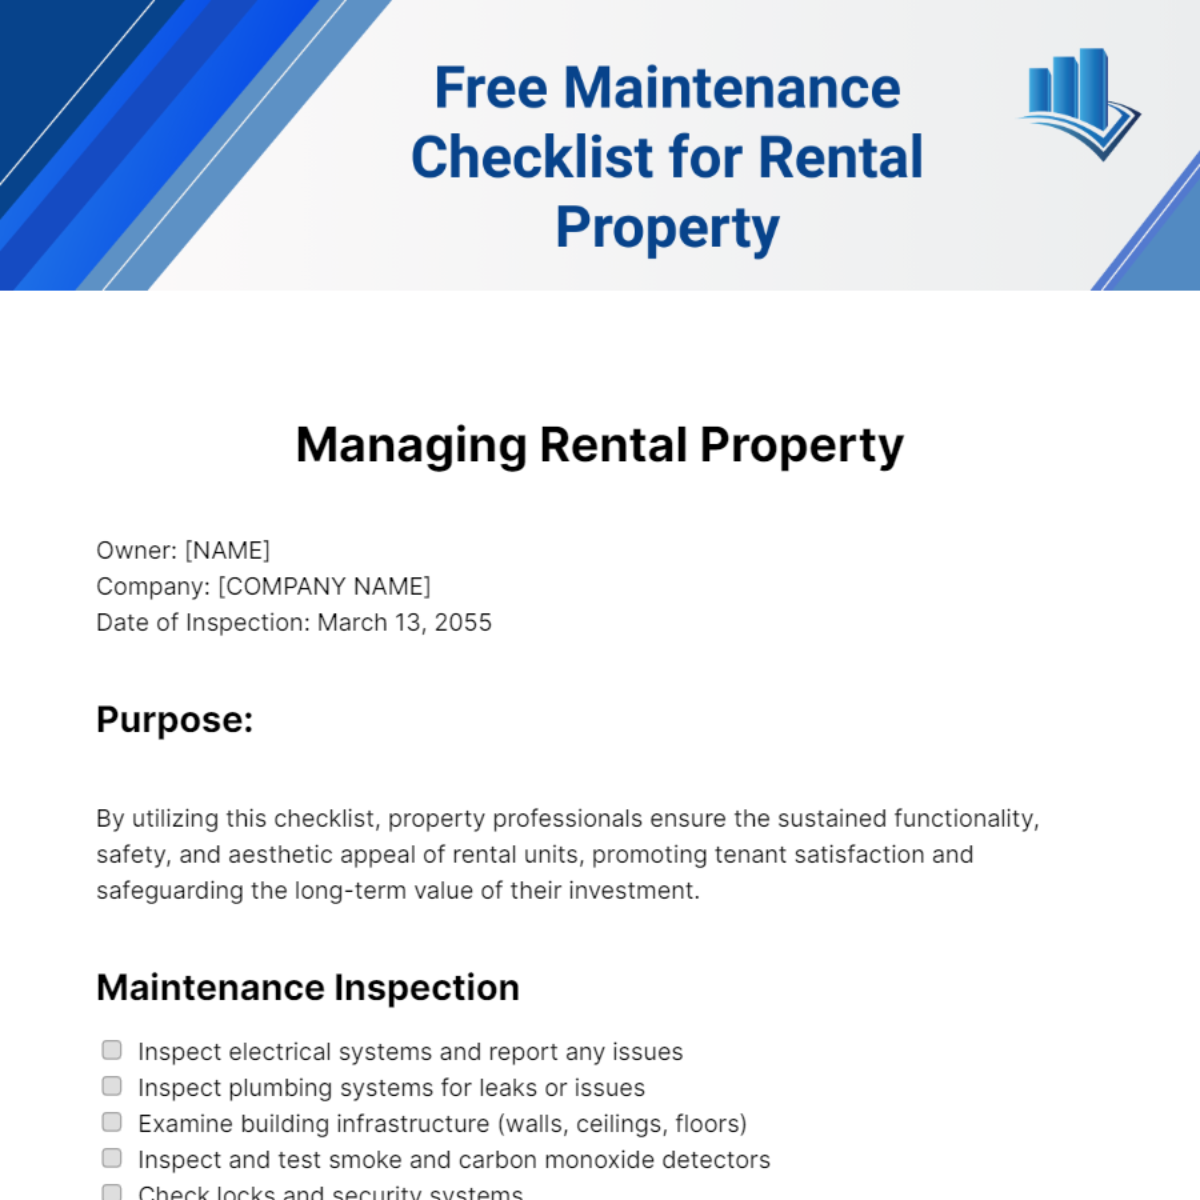 Free Maintenance Checklist for Rental Property Template